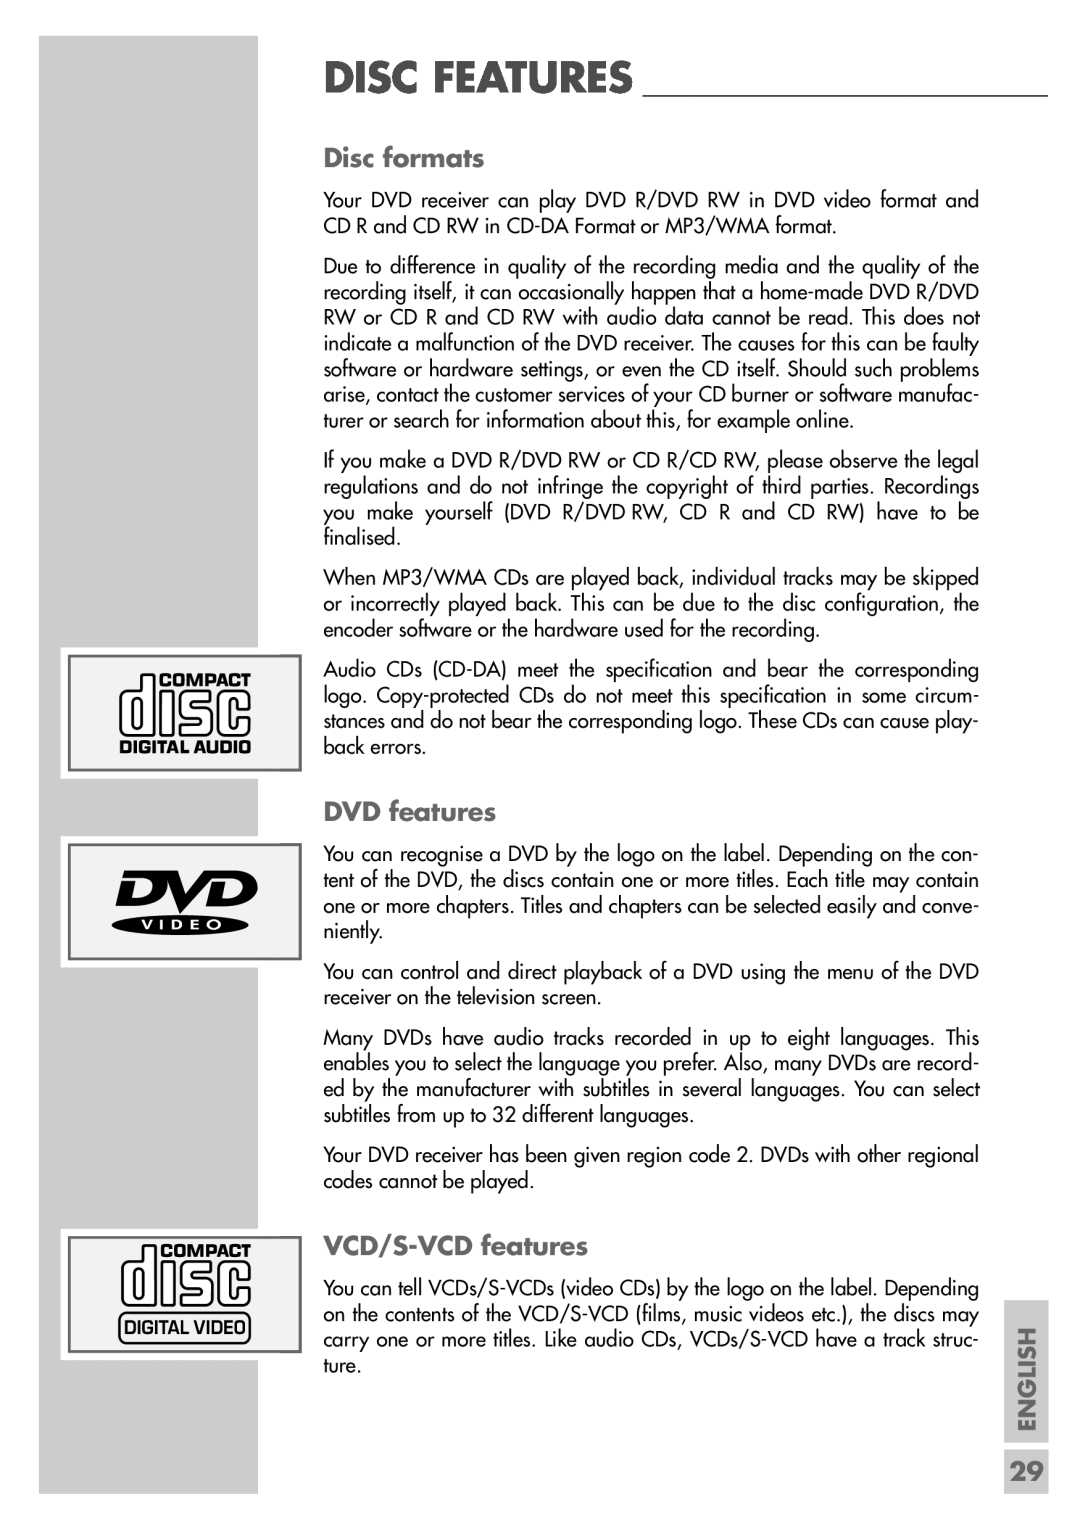 Grundig DR 3400 DD manual Disc formats, DVD features, VCD/S-VCDfeatures, English 